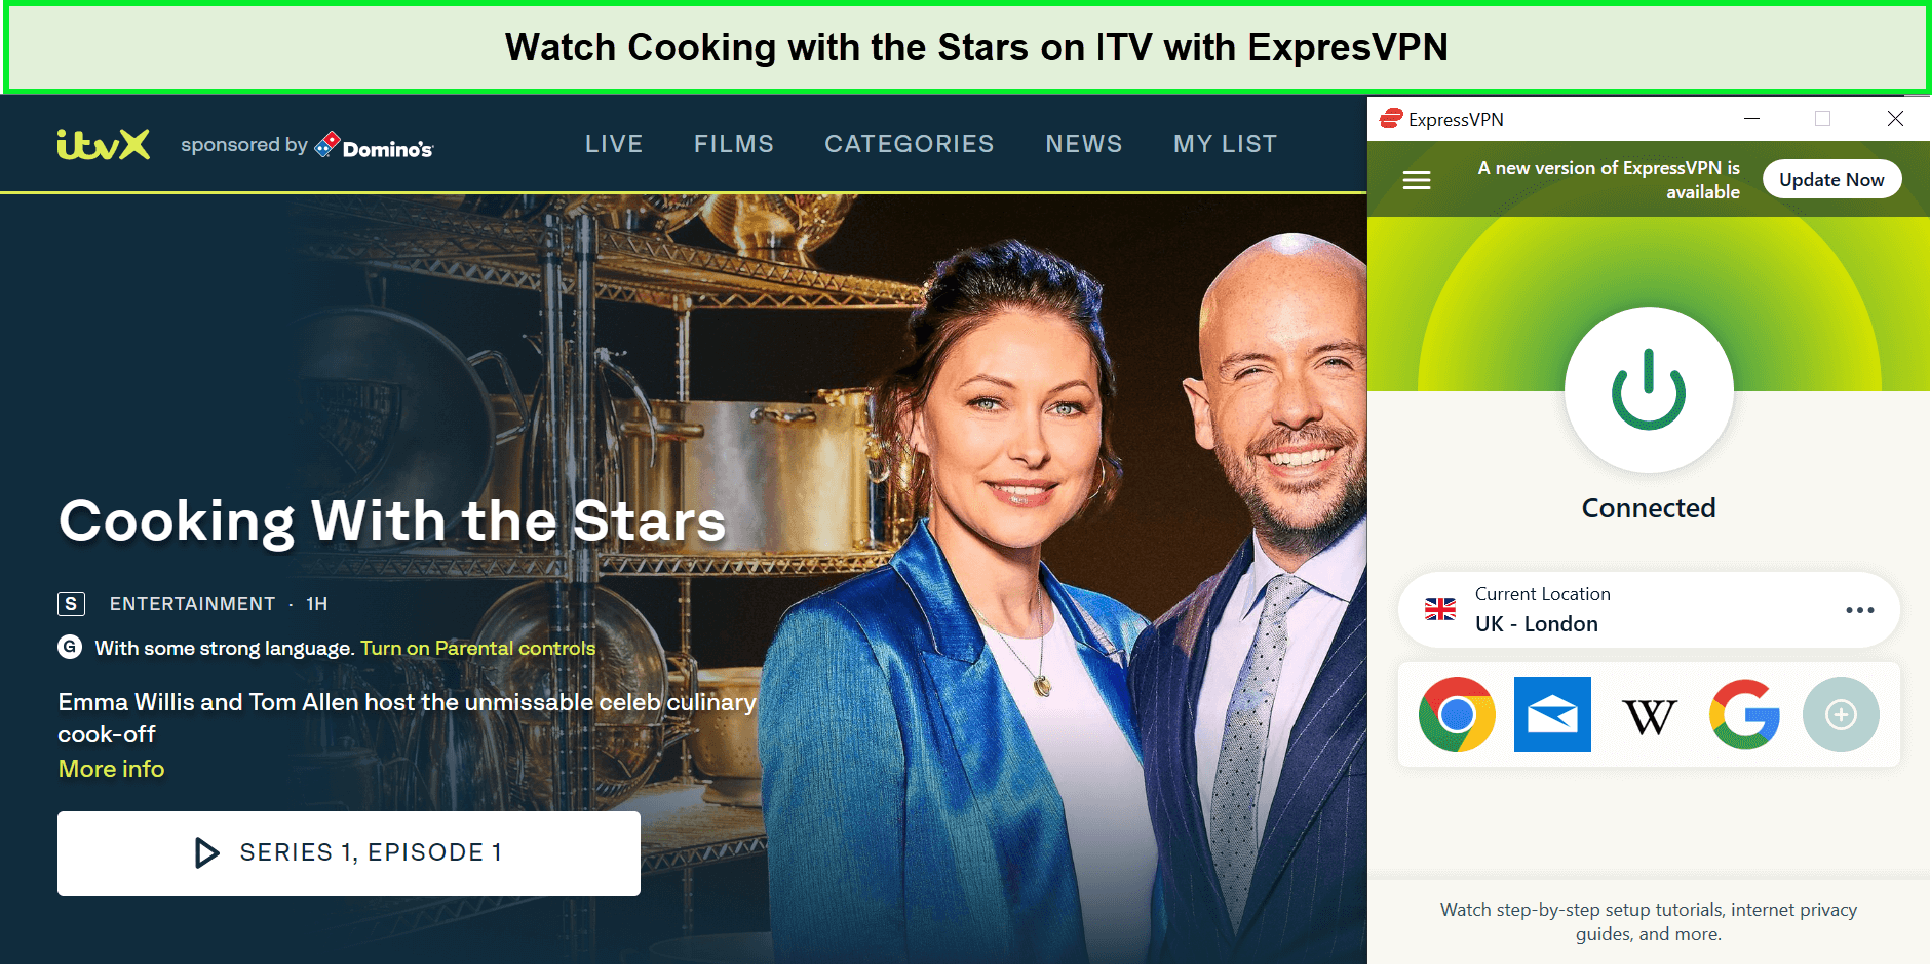 Watch-Cooking-with-the-Stars-Season-3-in-Germany-on-ITV-with-ExpresVPN